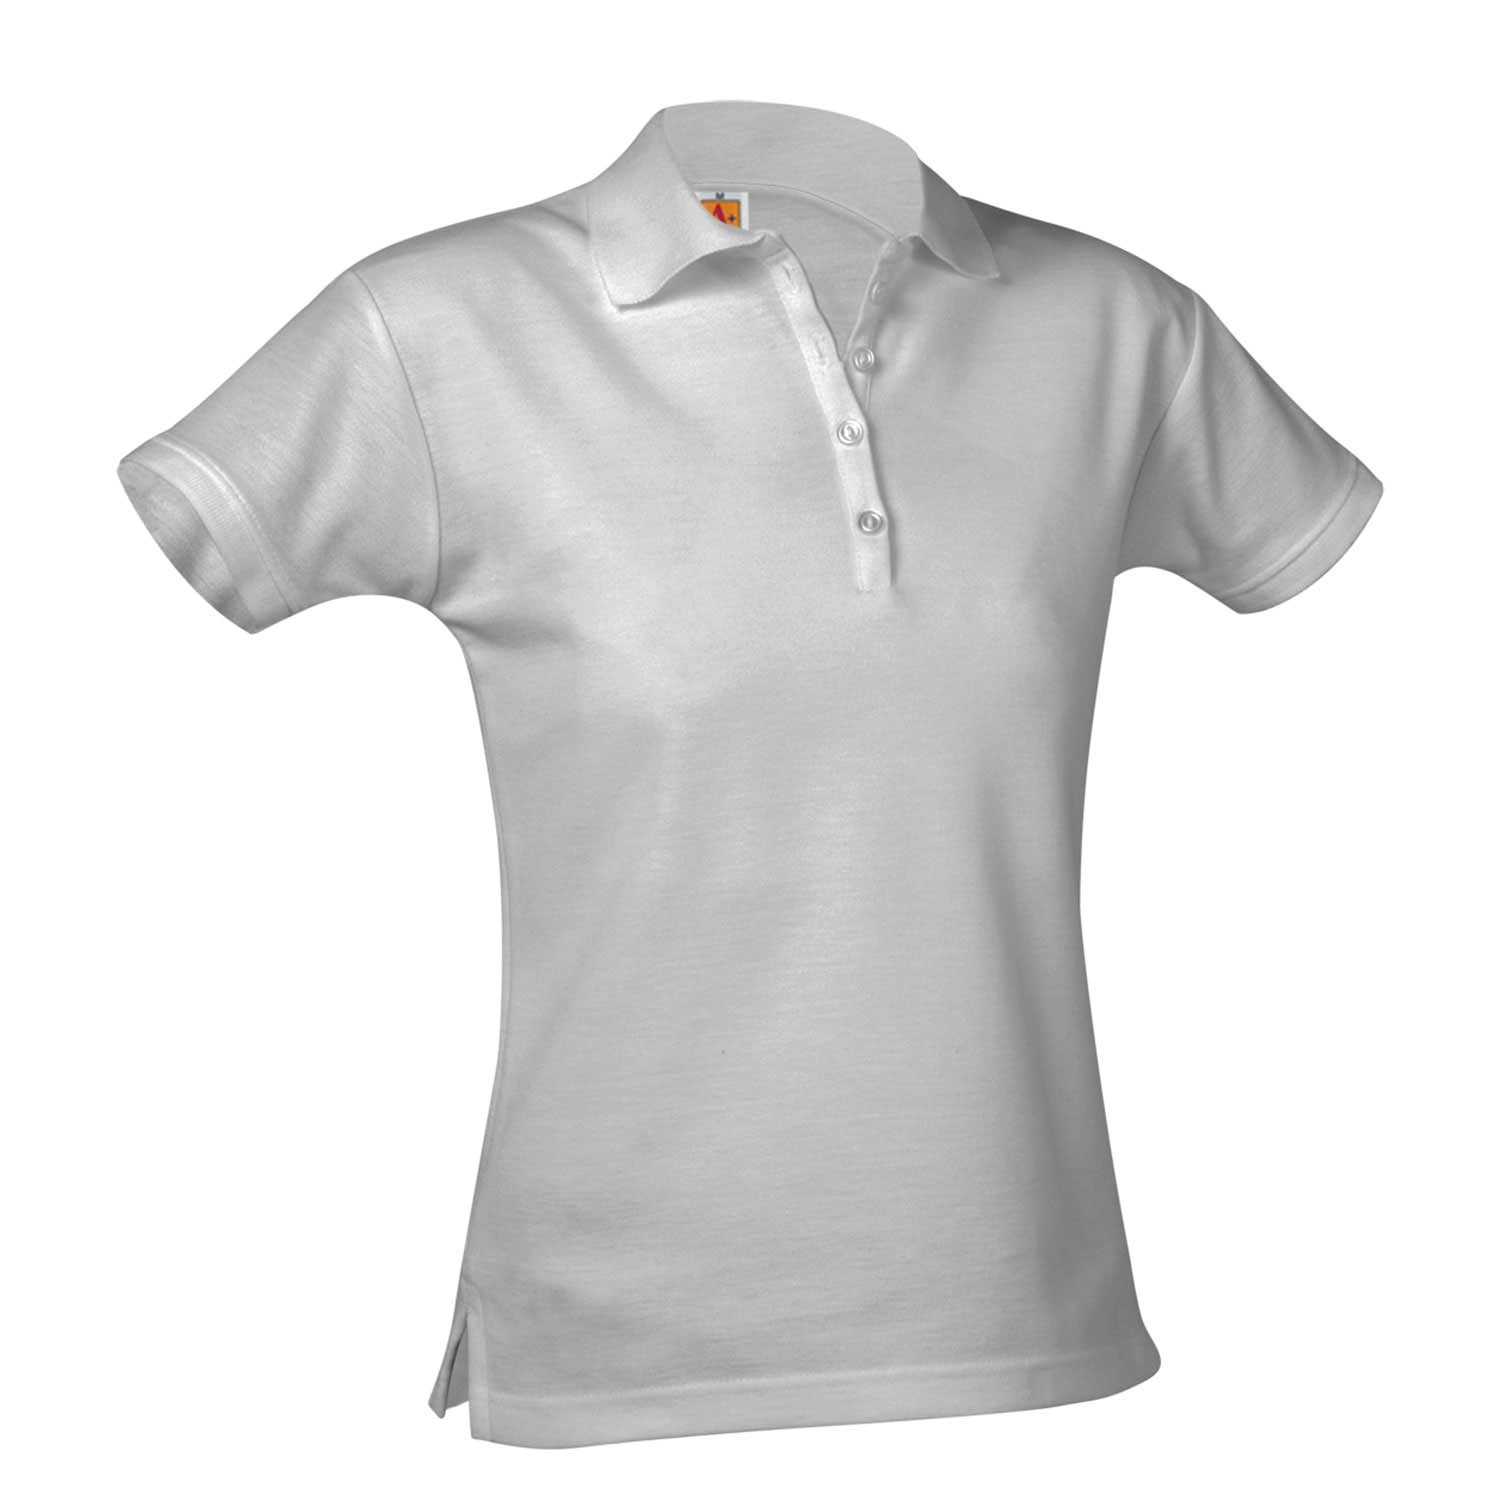 St. Philip Fitted Staff Polo